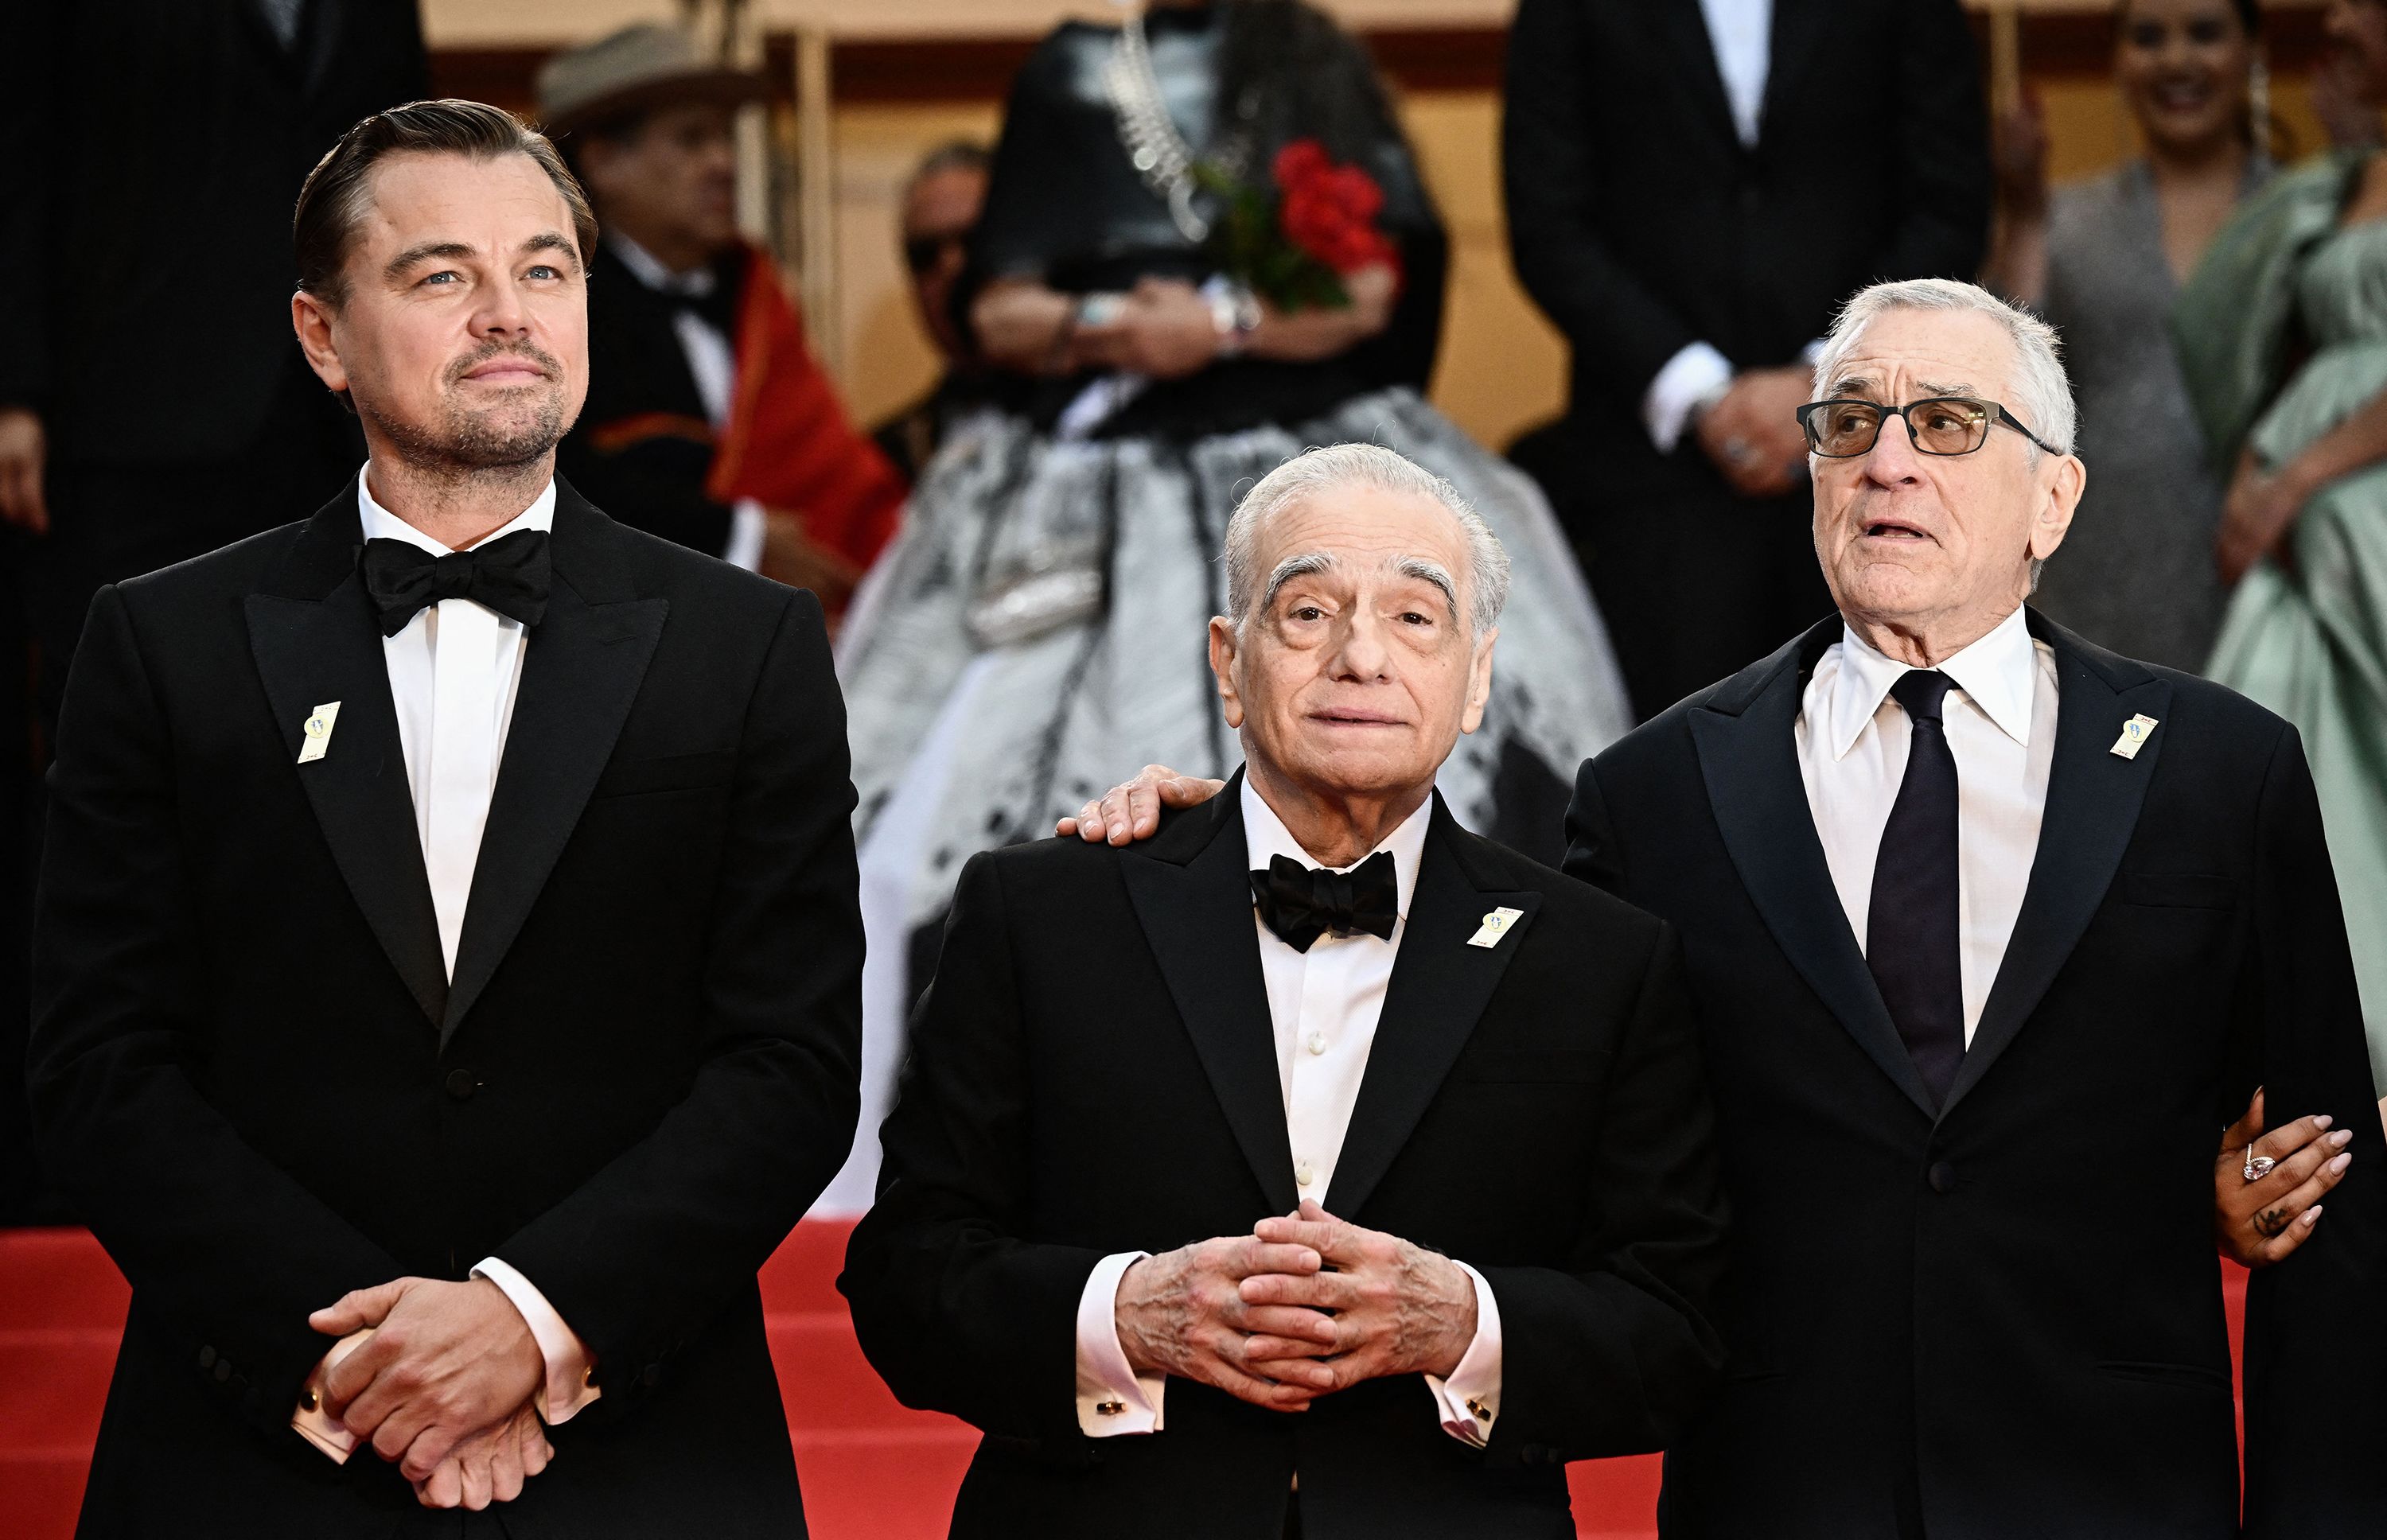 Leonardo DiCaprio and Martin Scorsese's 'Killers of The Flower Moon' gets raucous applause at Cannes premiere